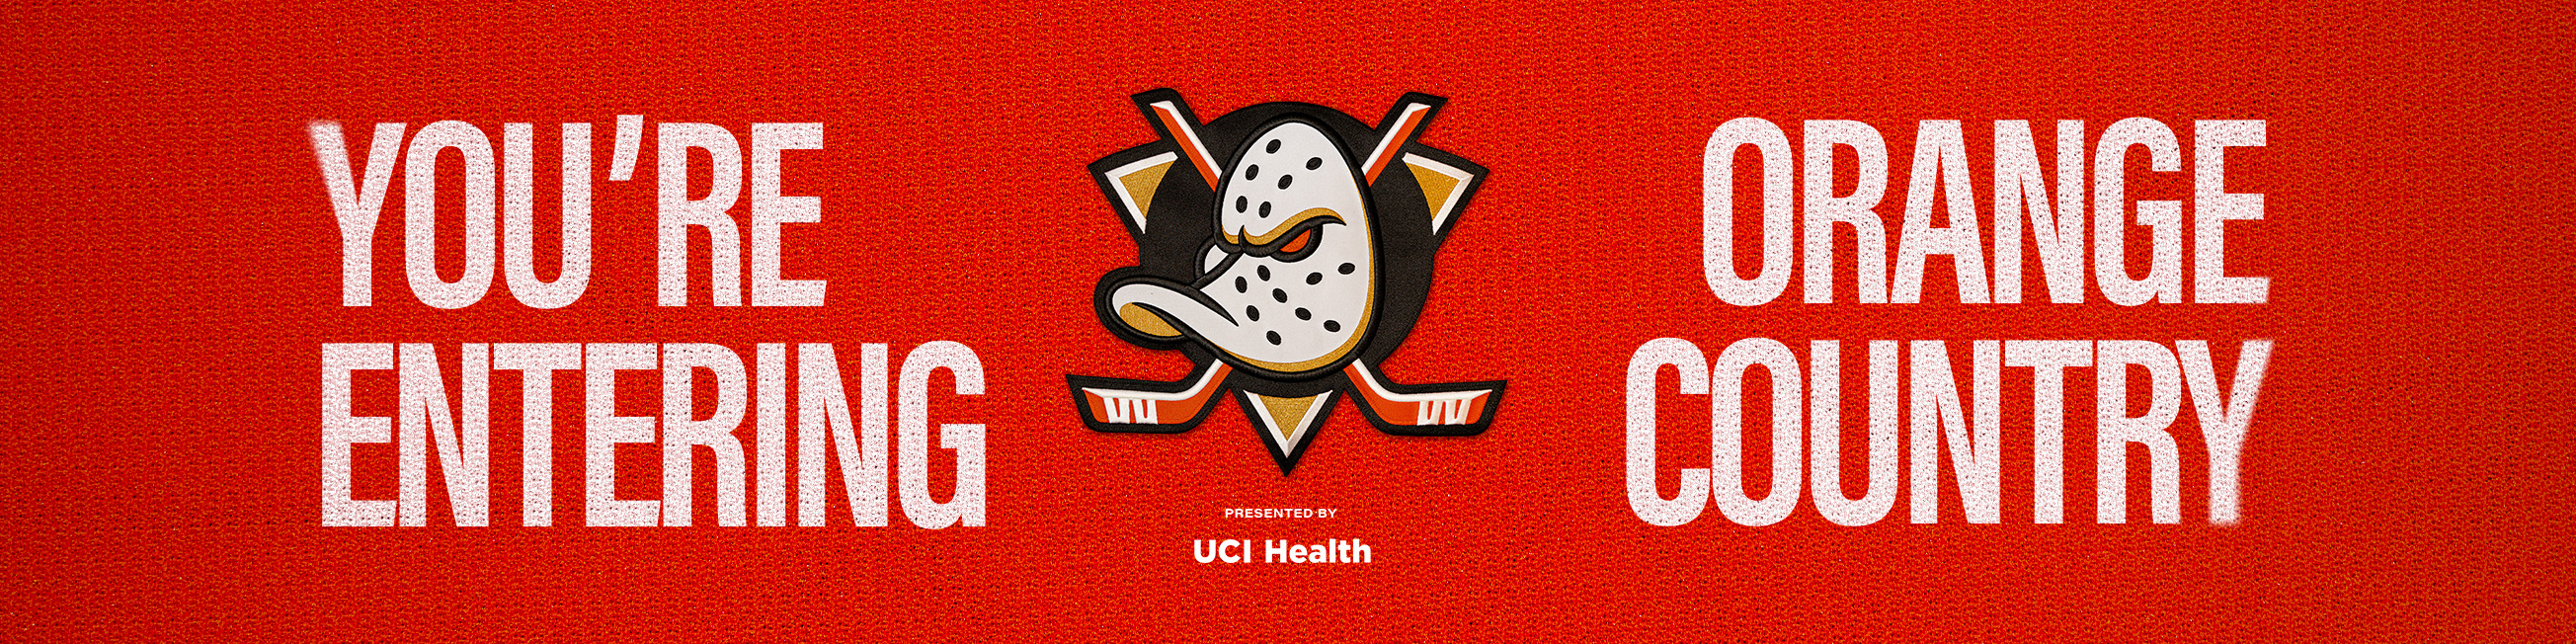 Text: "You're entering Orange Country" with Anaheim Ducks logo presented by UCI Health